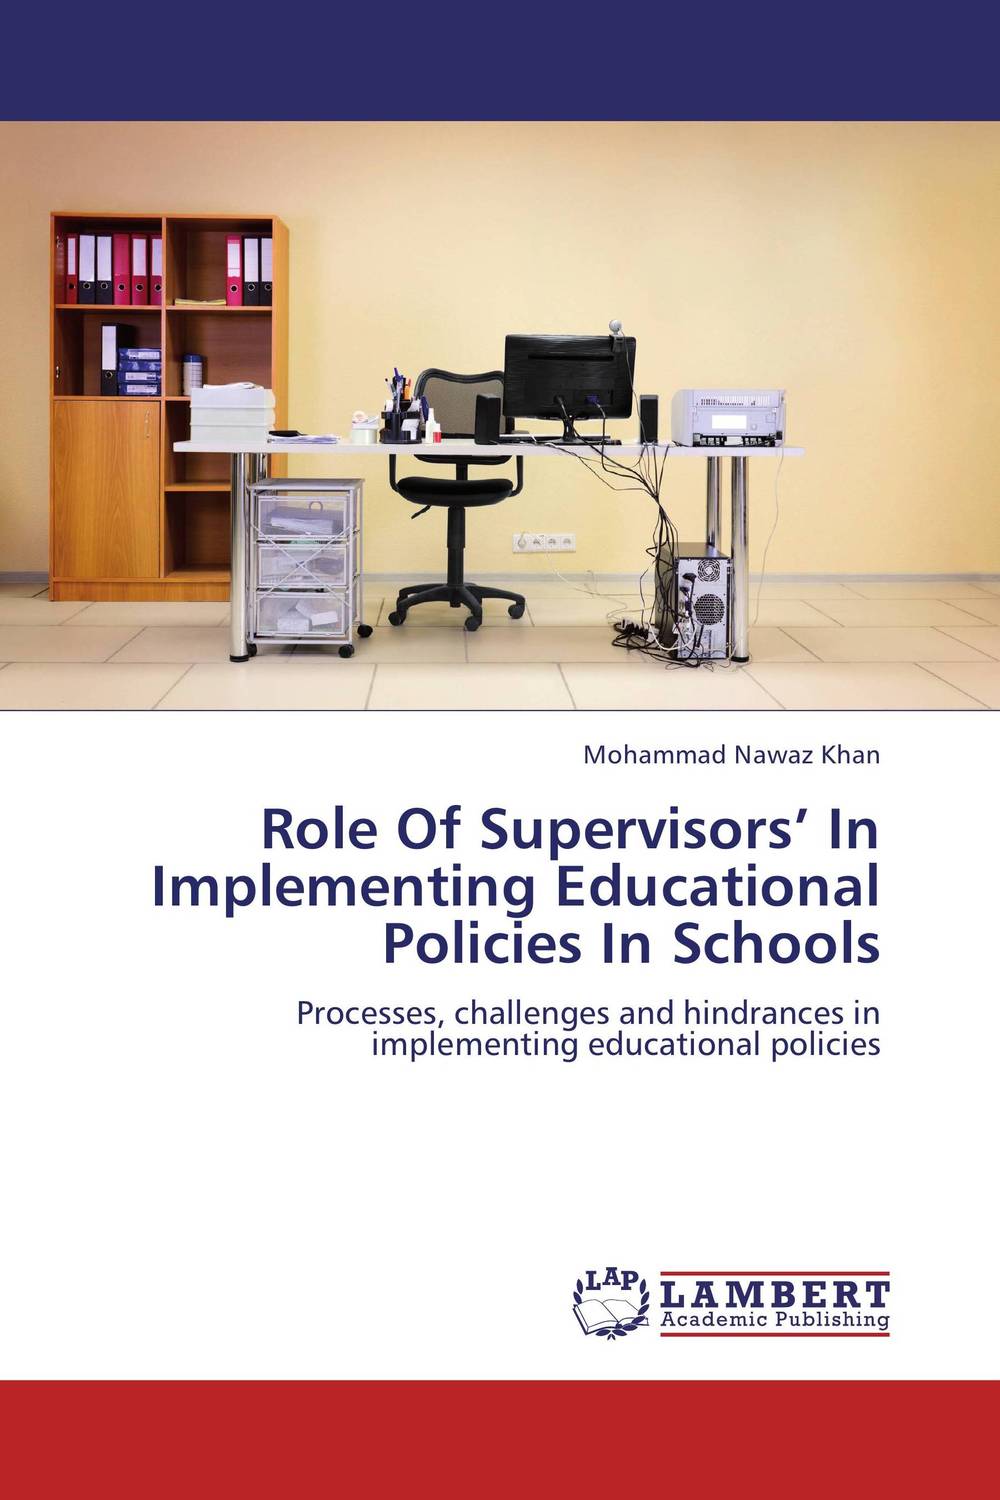 Role Of Supervisors’ In Implementing Educational Policies In Schools